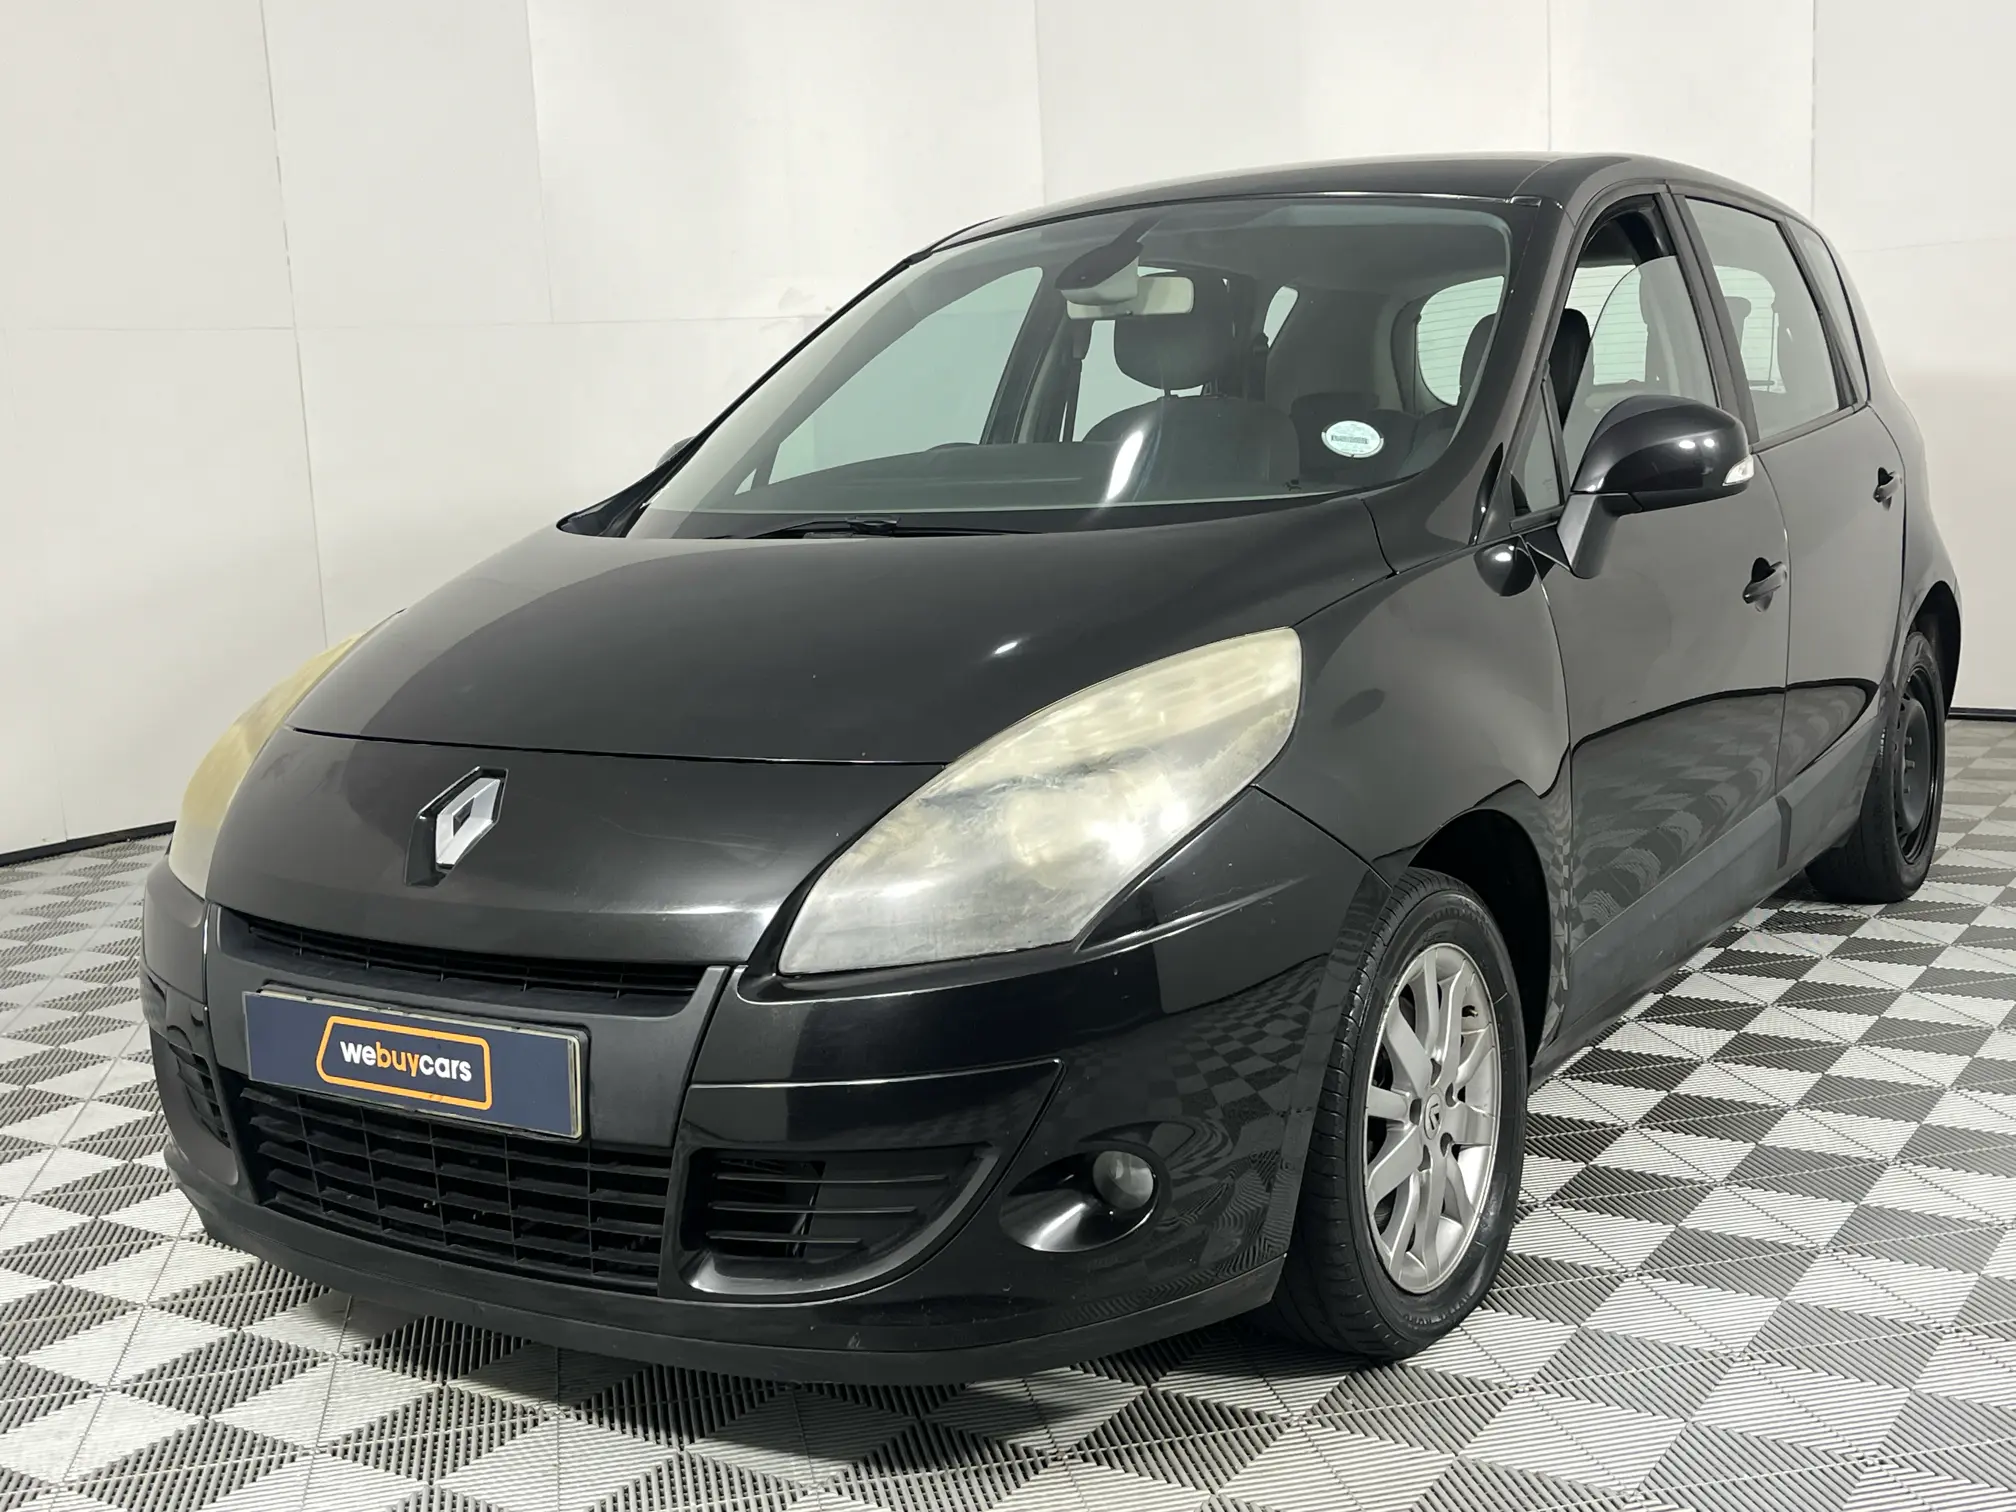 2010 Renault Scenic III 1.6 Expression